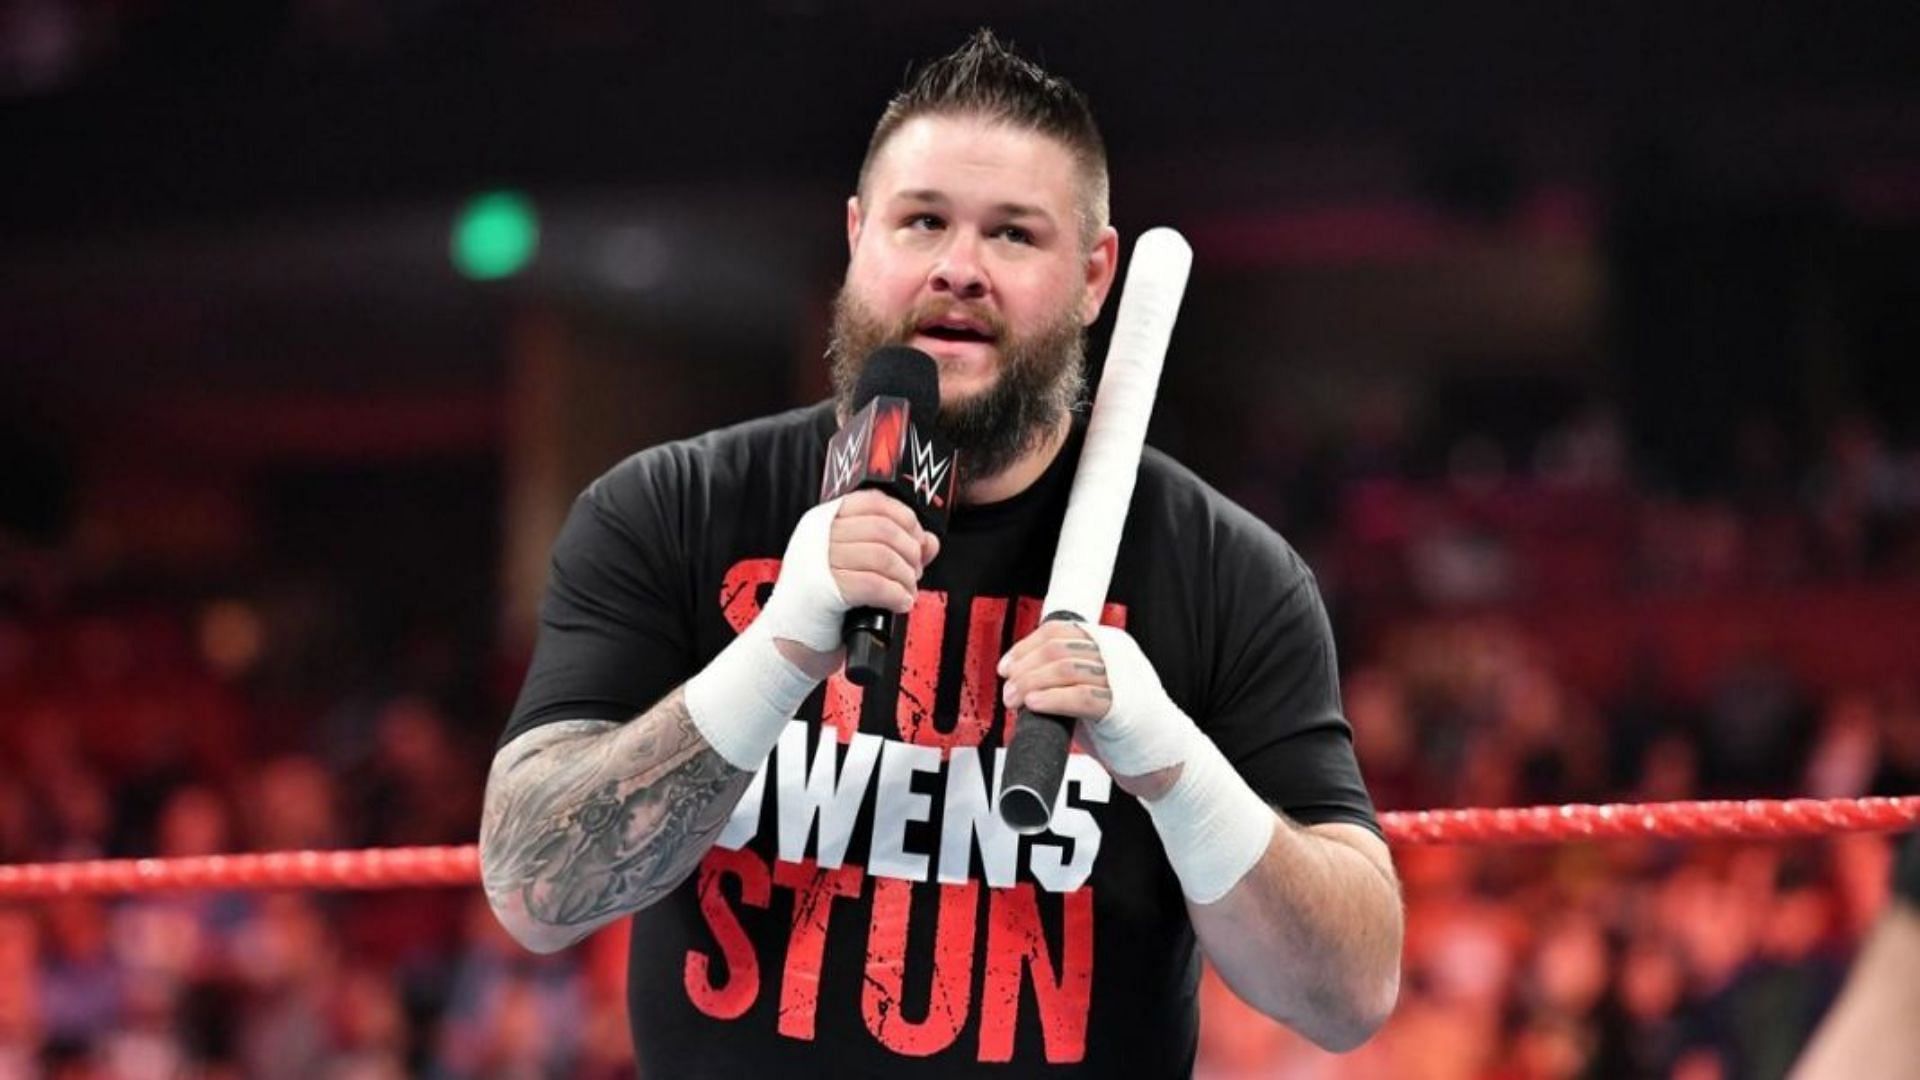 Kevin Owens could face Stone Cold Steve Austin at WrestleMania 38